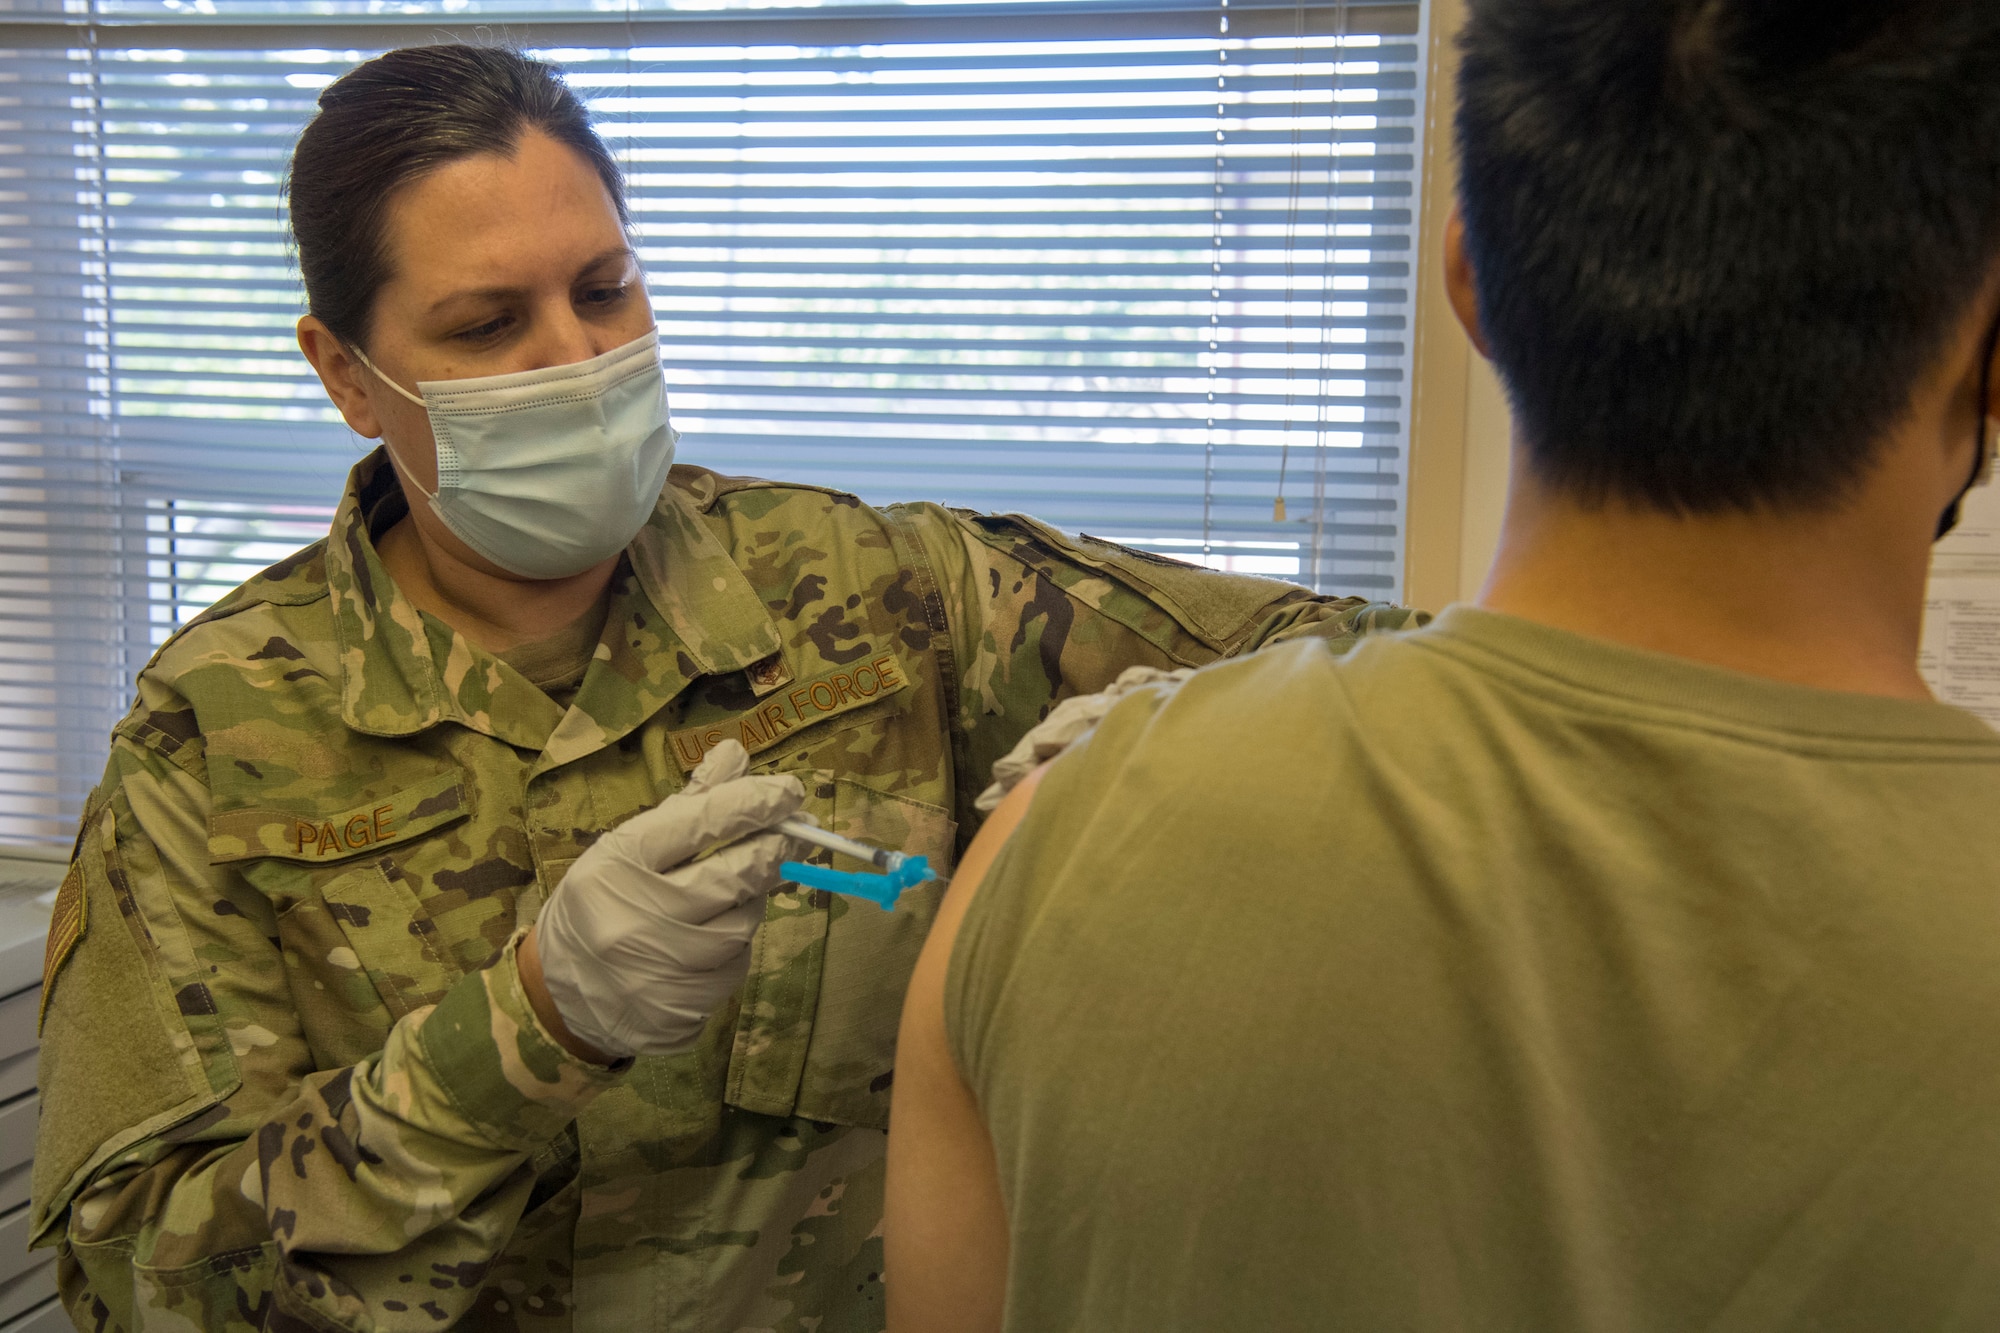 U.S. Air Force Capt. Kathleen Page with the 624th Aeromedical Staging Squadron administers a COVID-19 vaccine at Joint Base Pearl Harbor-Hickam, Hawaii, March 7, 2021, during the Unit Training Assembly.